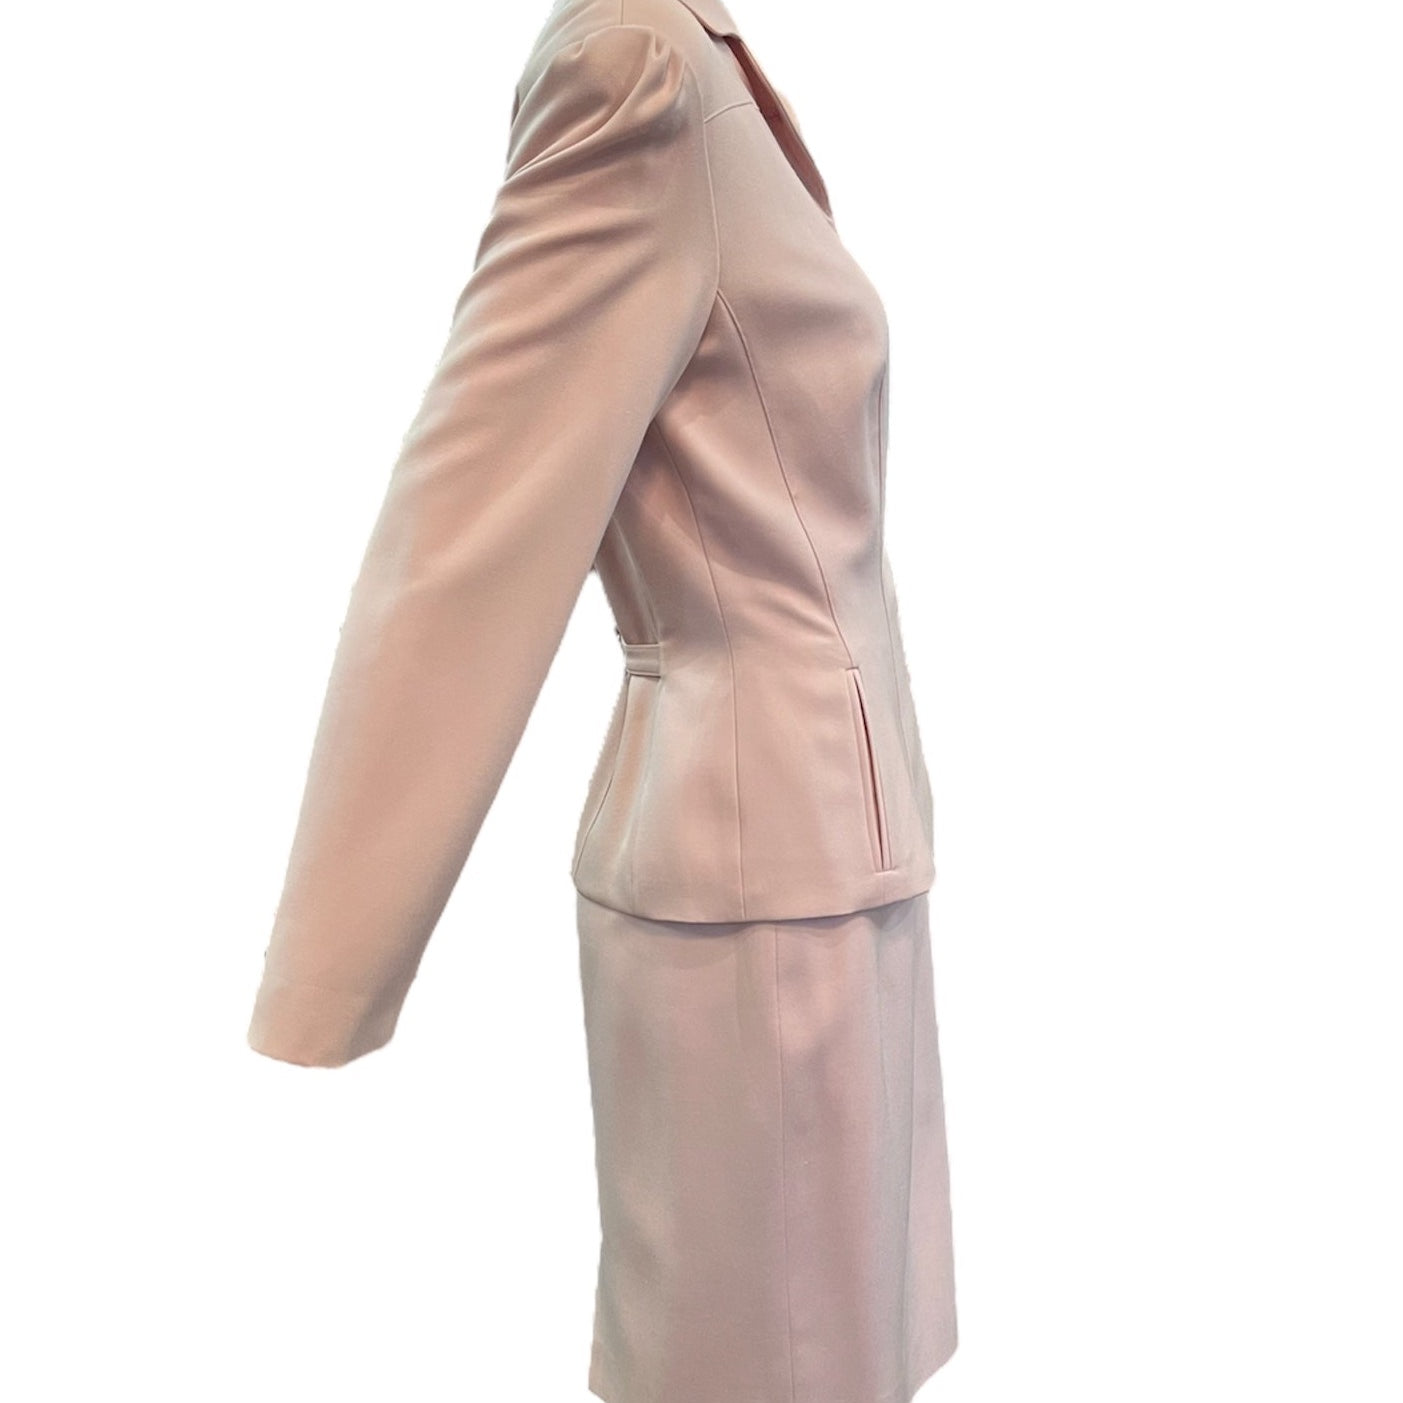 Thierry Mugler 90s Dusty Pink Skirt Suit SIDE 2 of 8